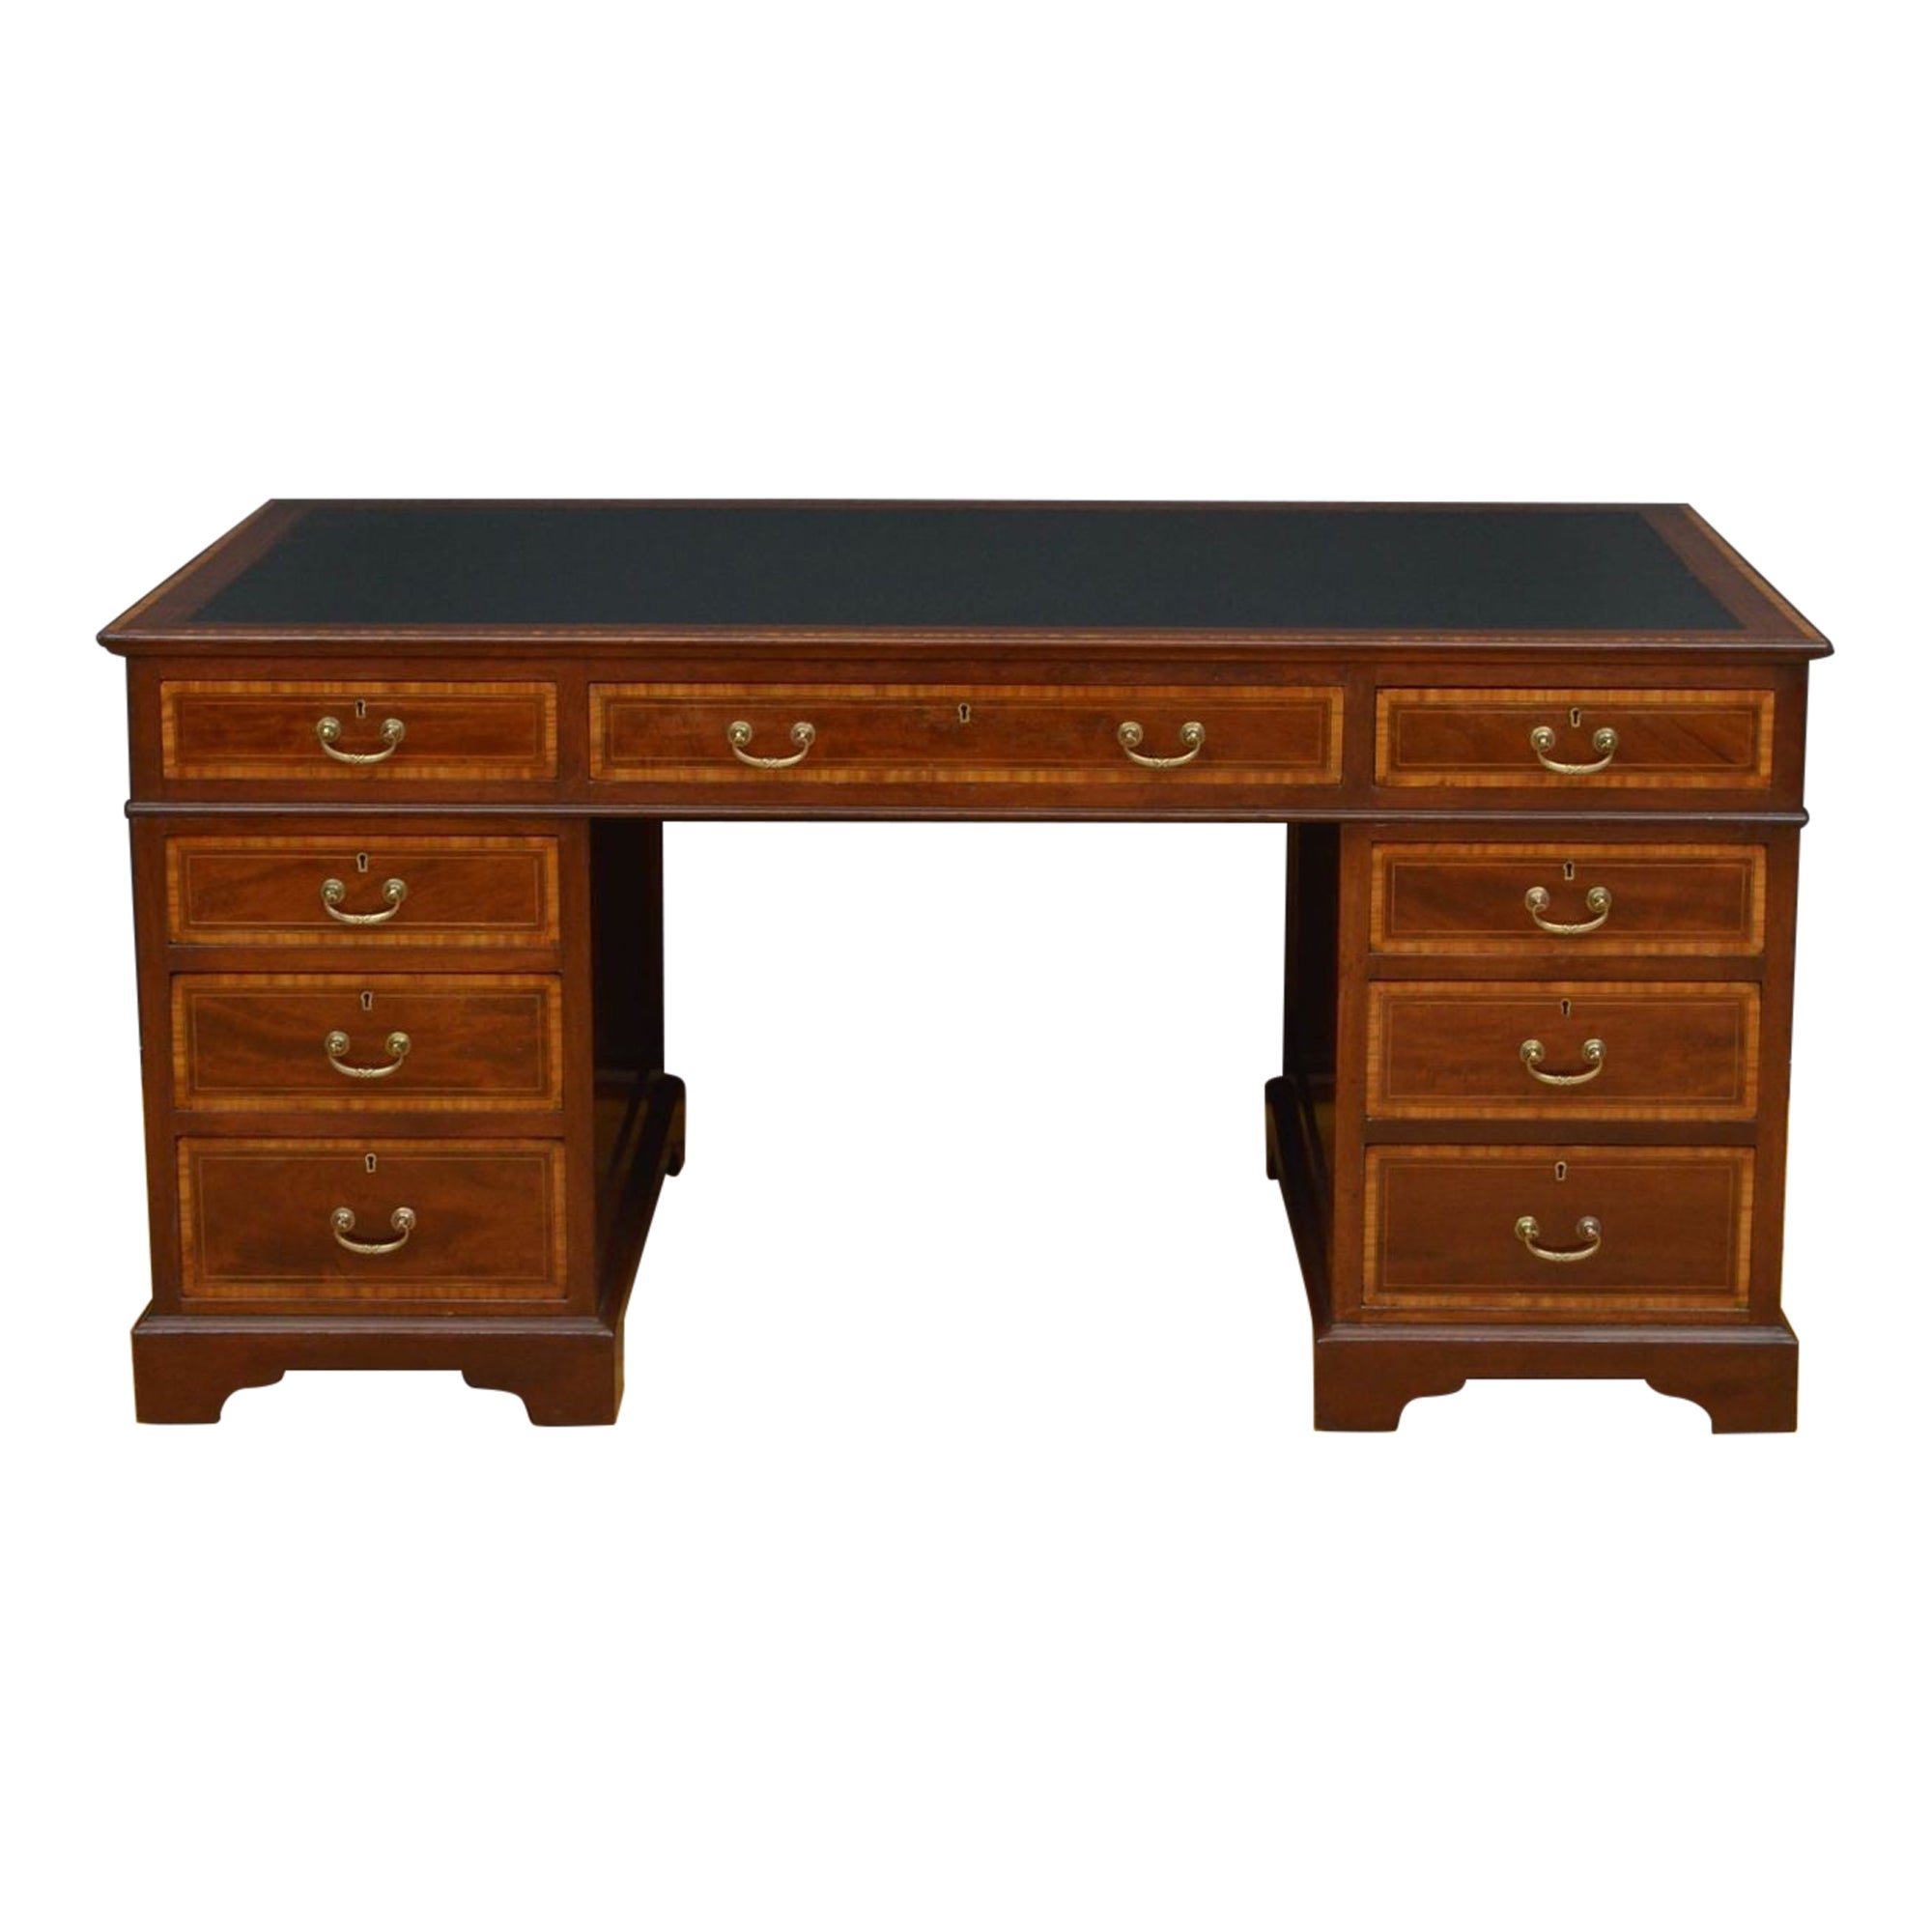 Late Victorian Mahogany and Inlaid Desk